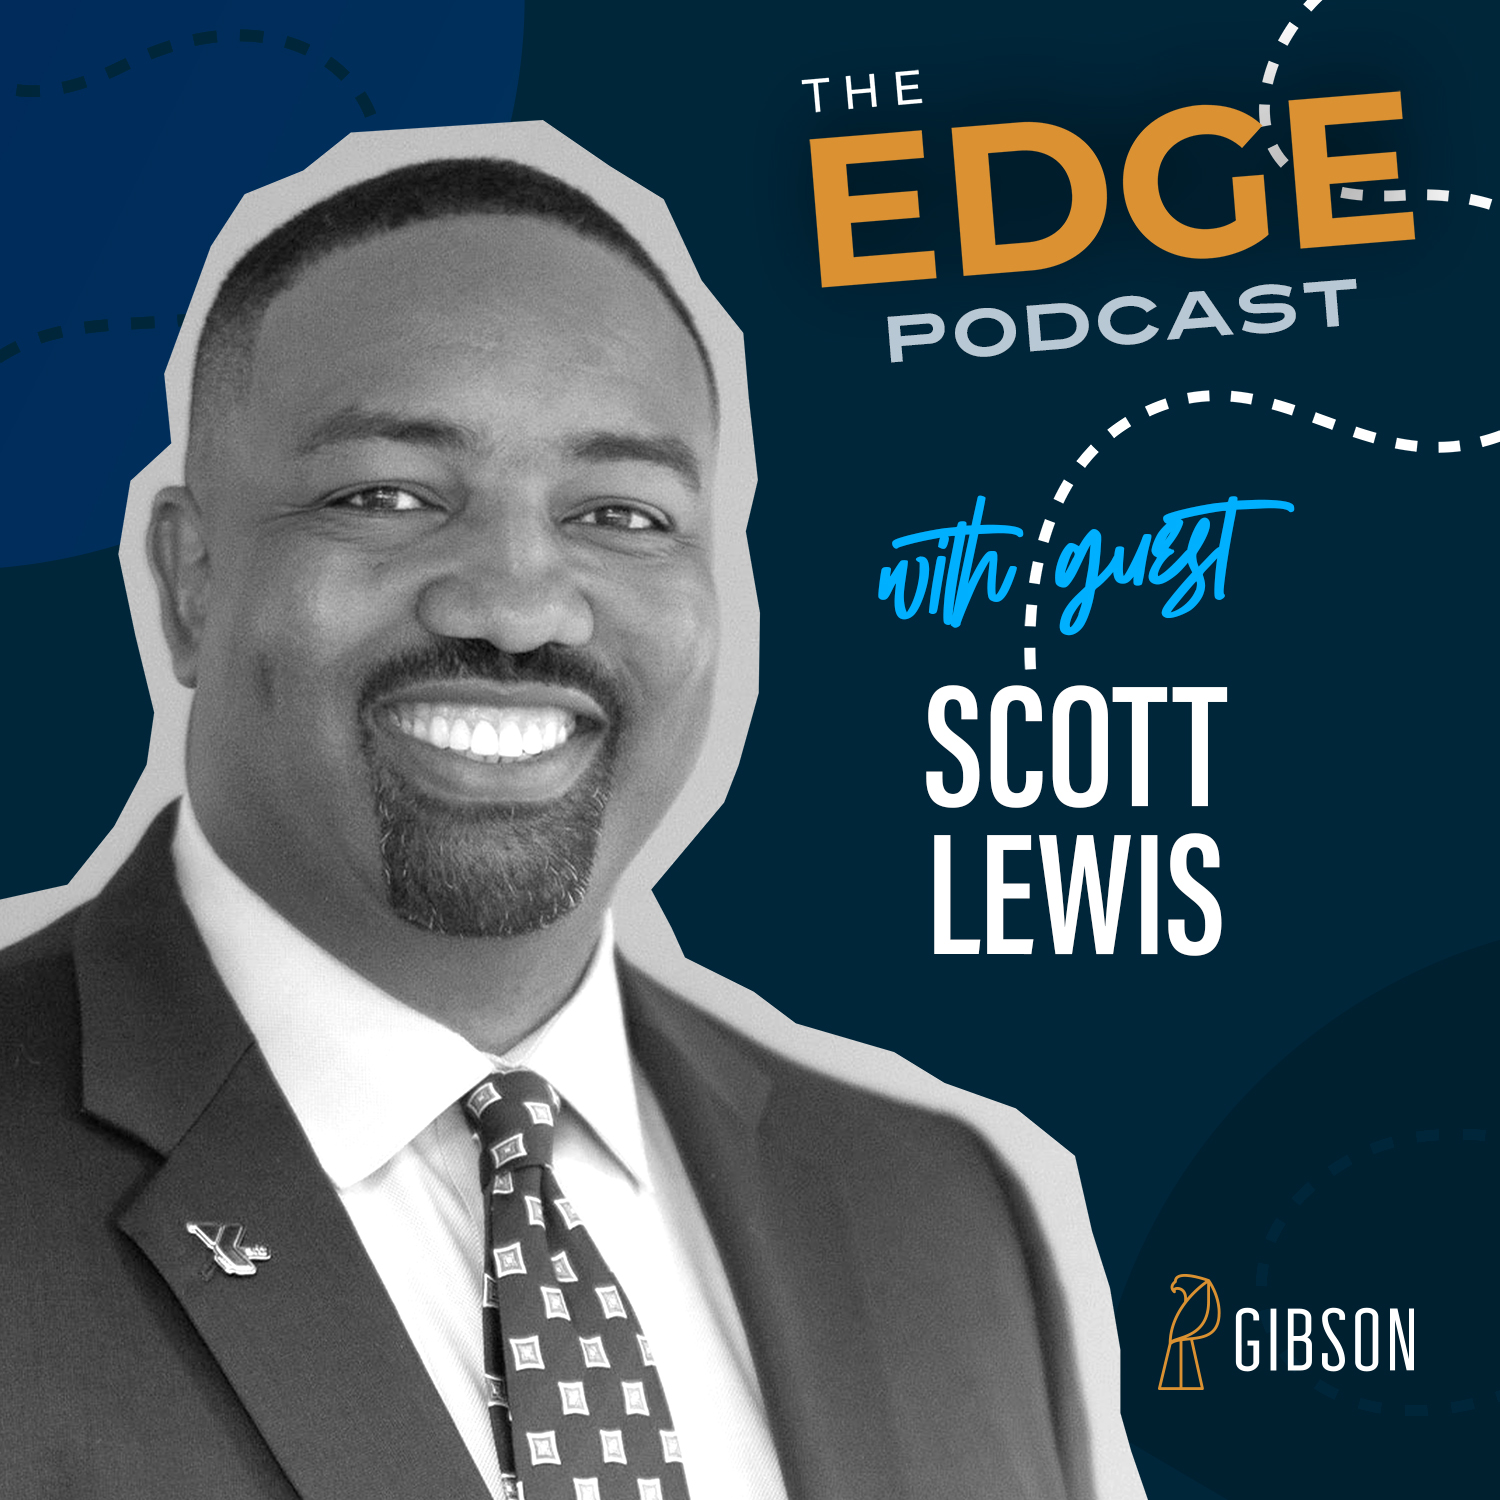 Scott Lewis dives into leadership, teams, and communication